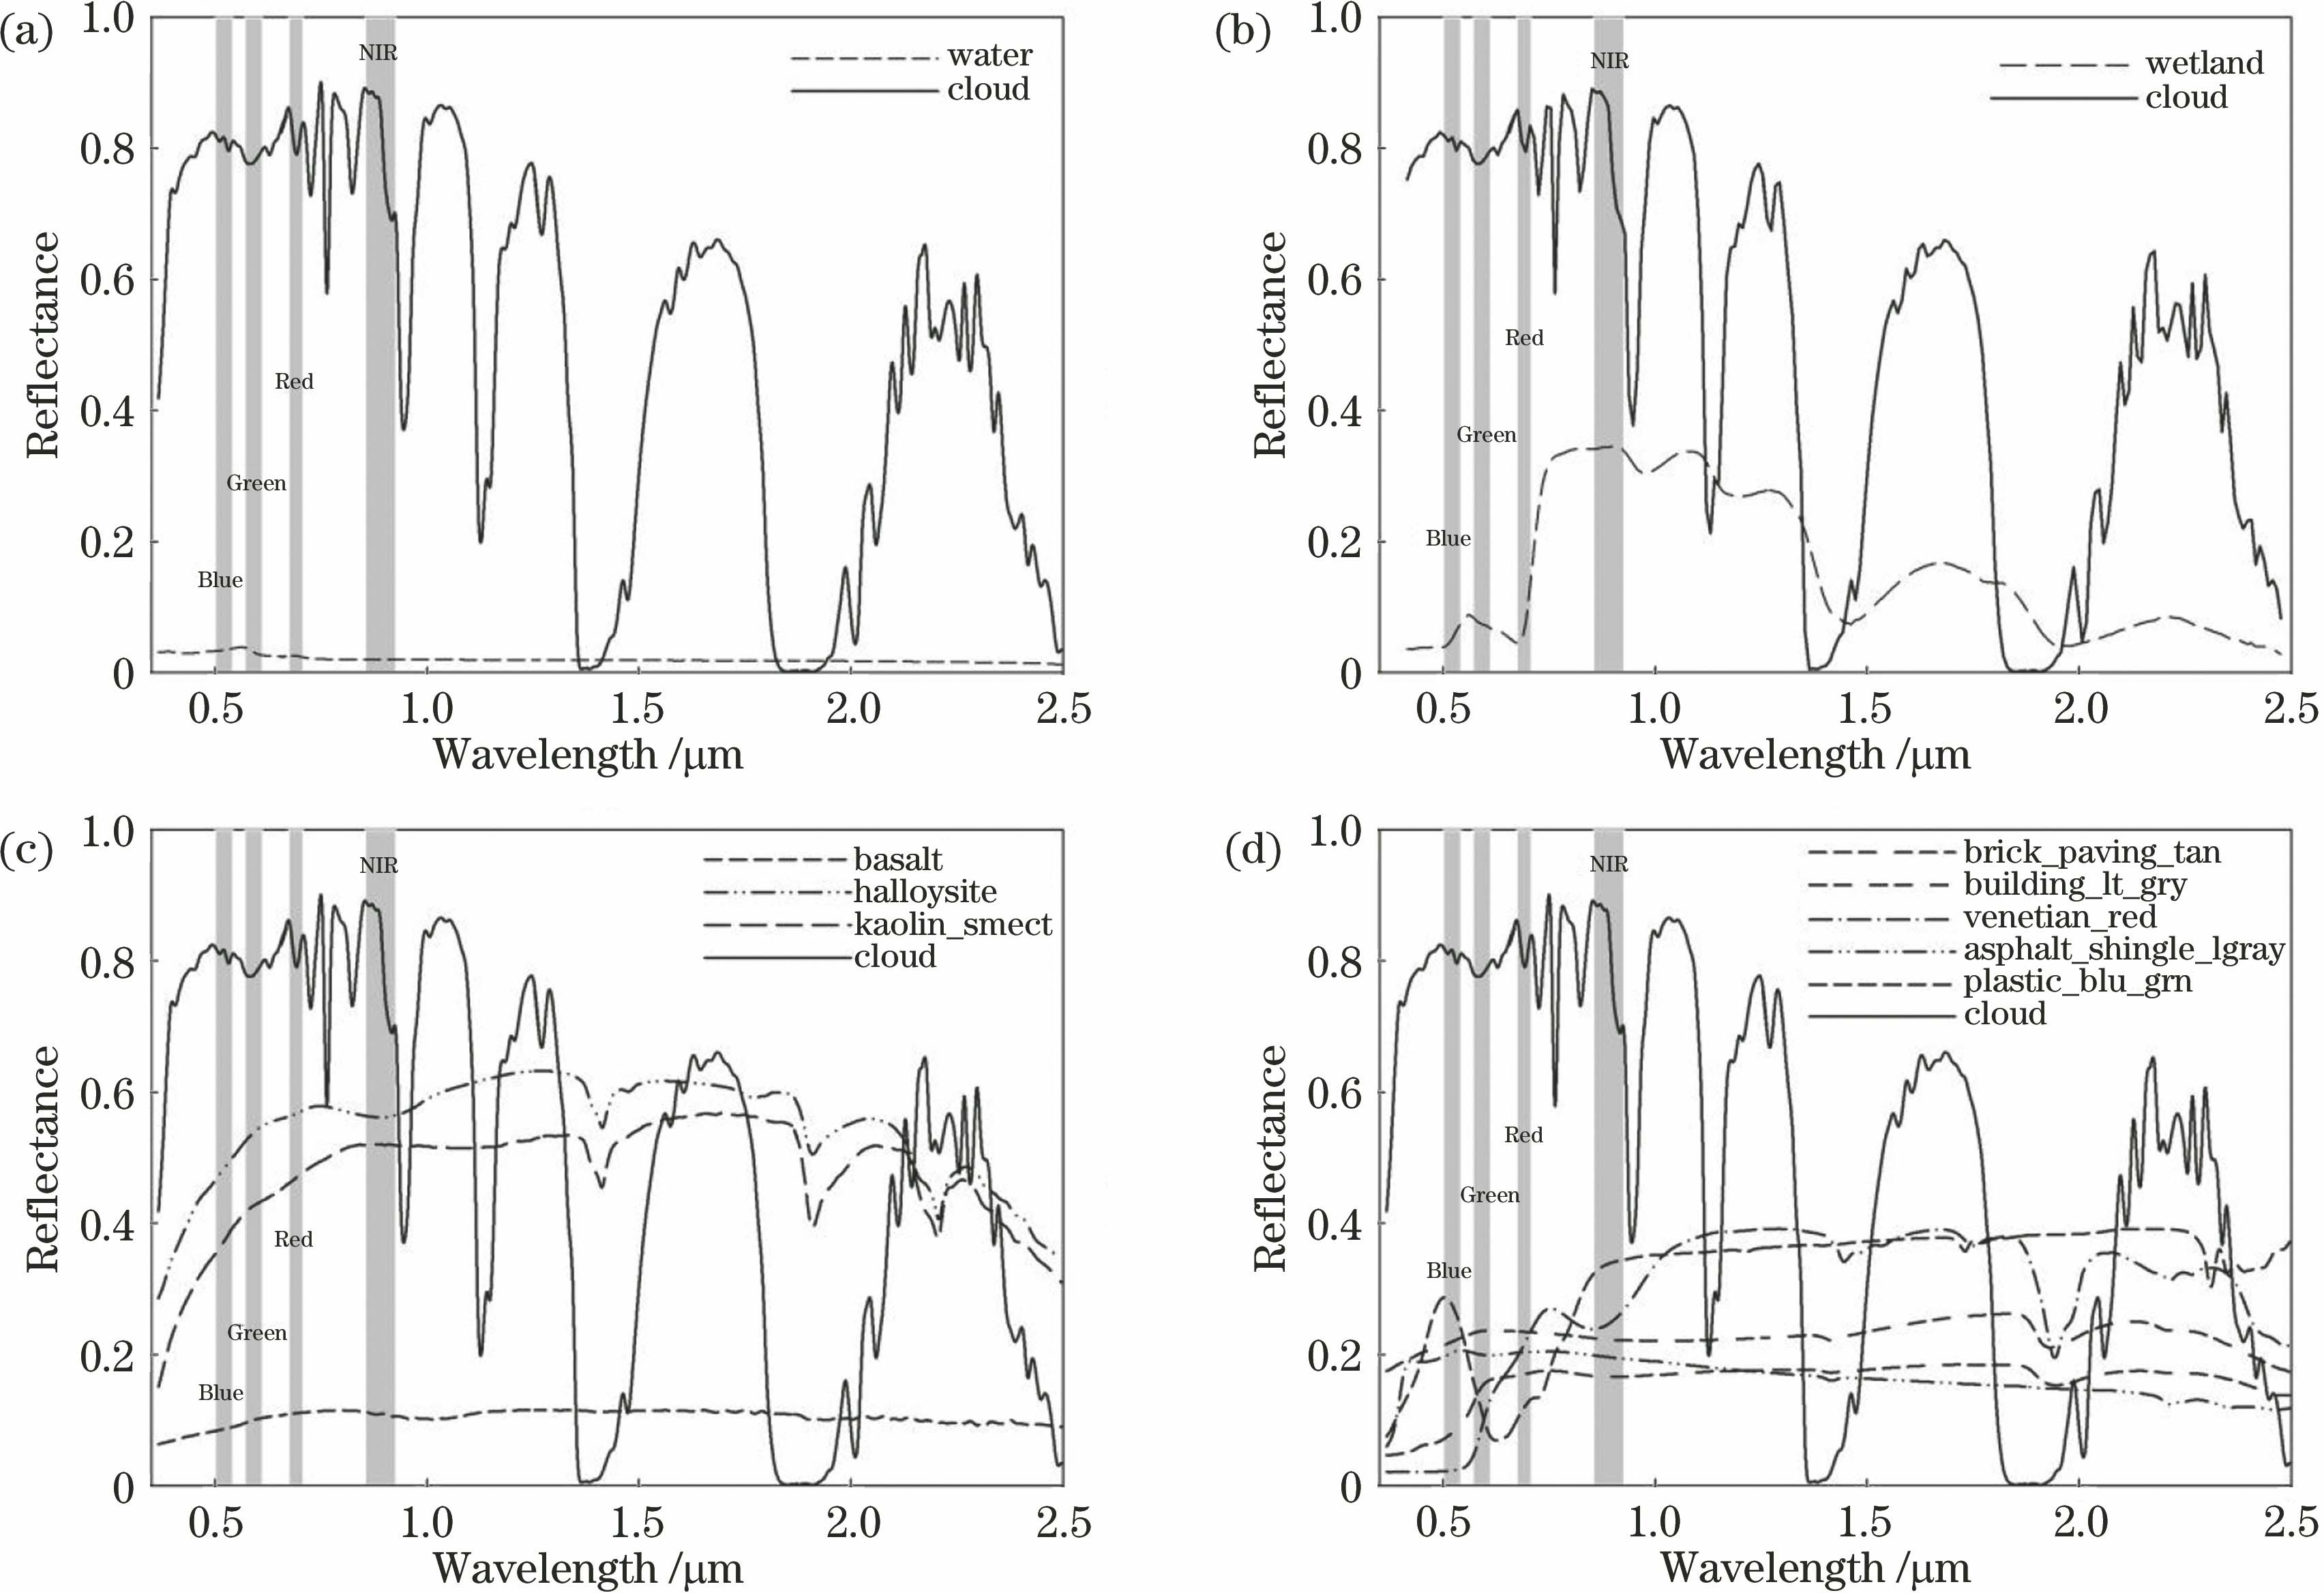 Surface reflectance characteristics of non-spatiotemporal series. (a) Water; (b) wetland; (c) bareland; (d) impervious surface